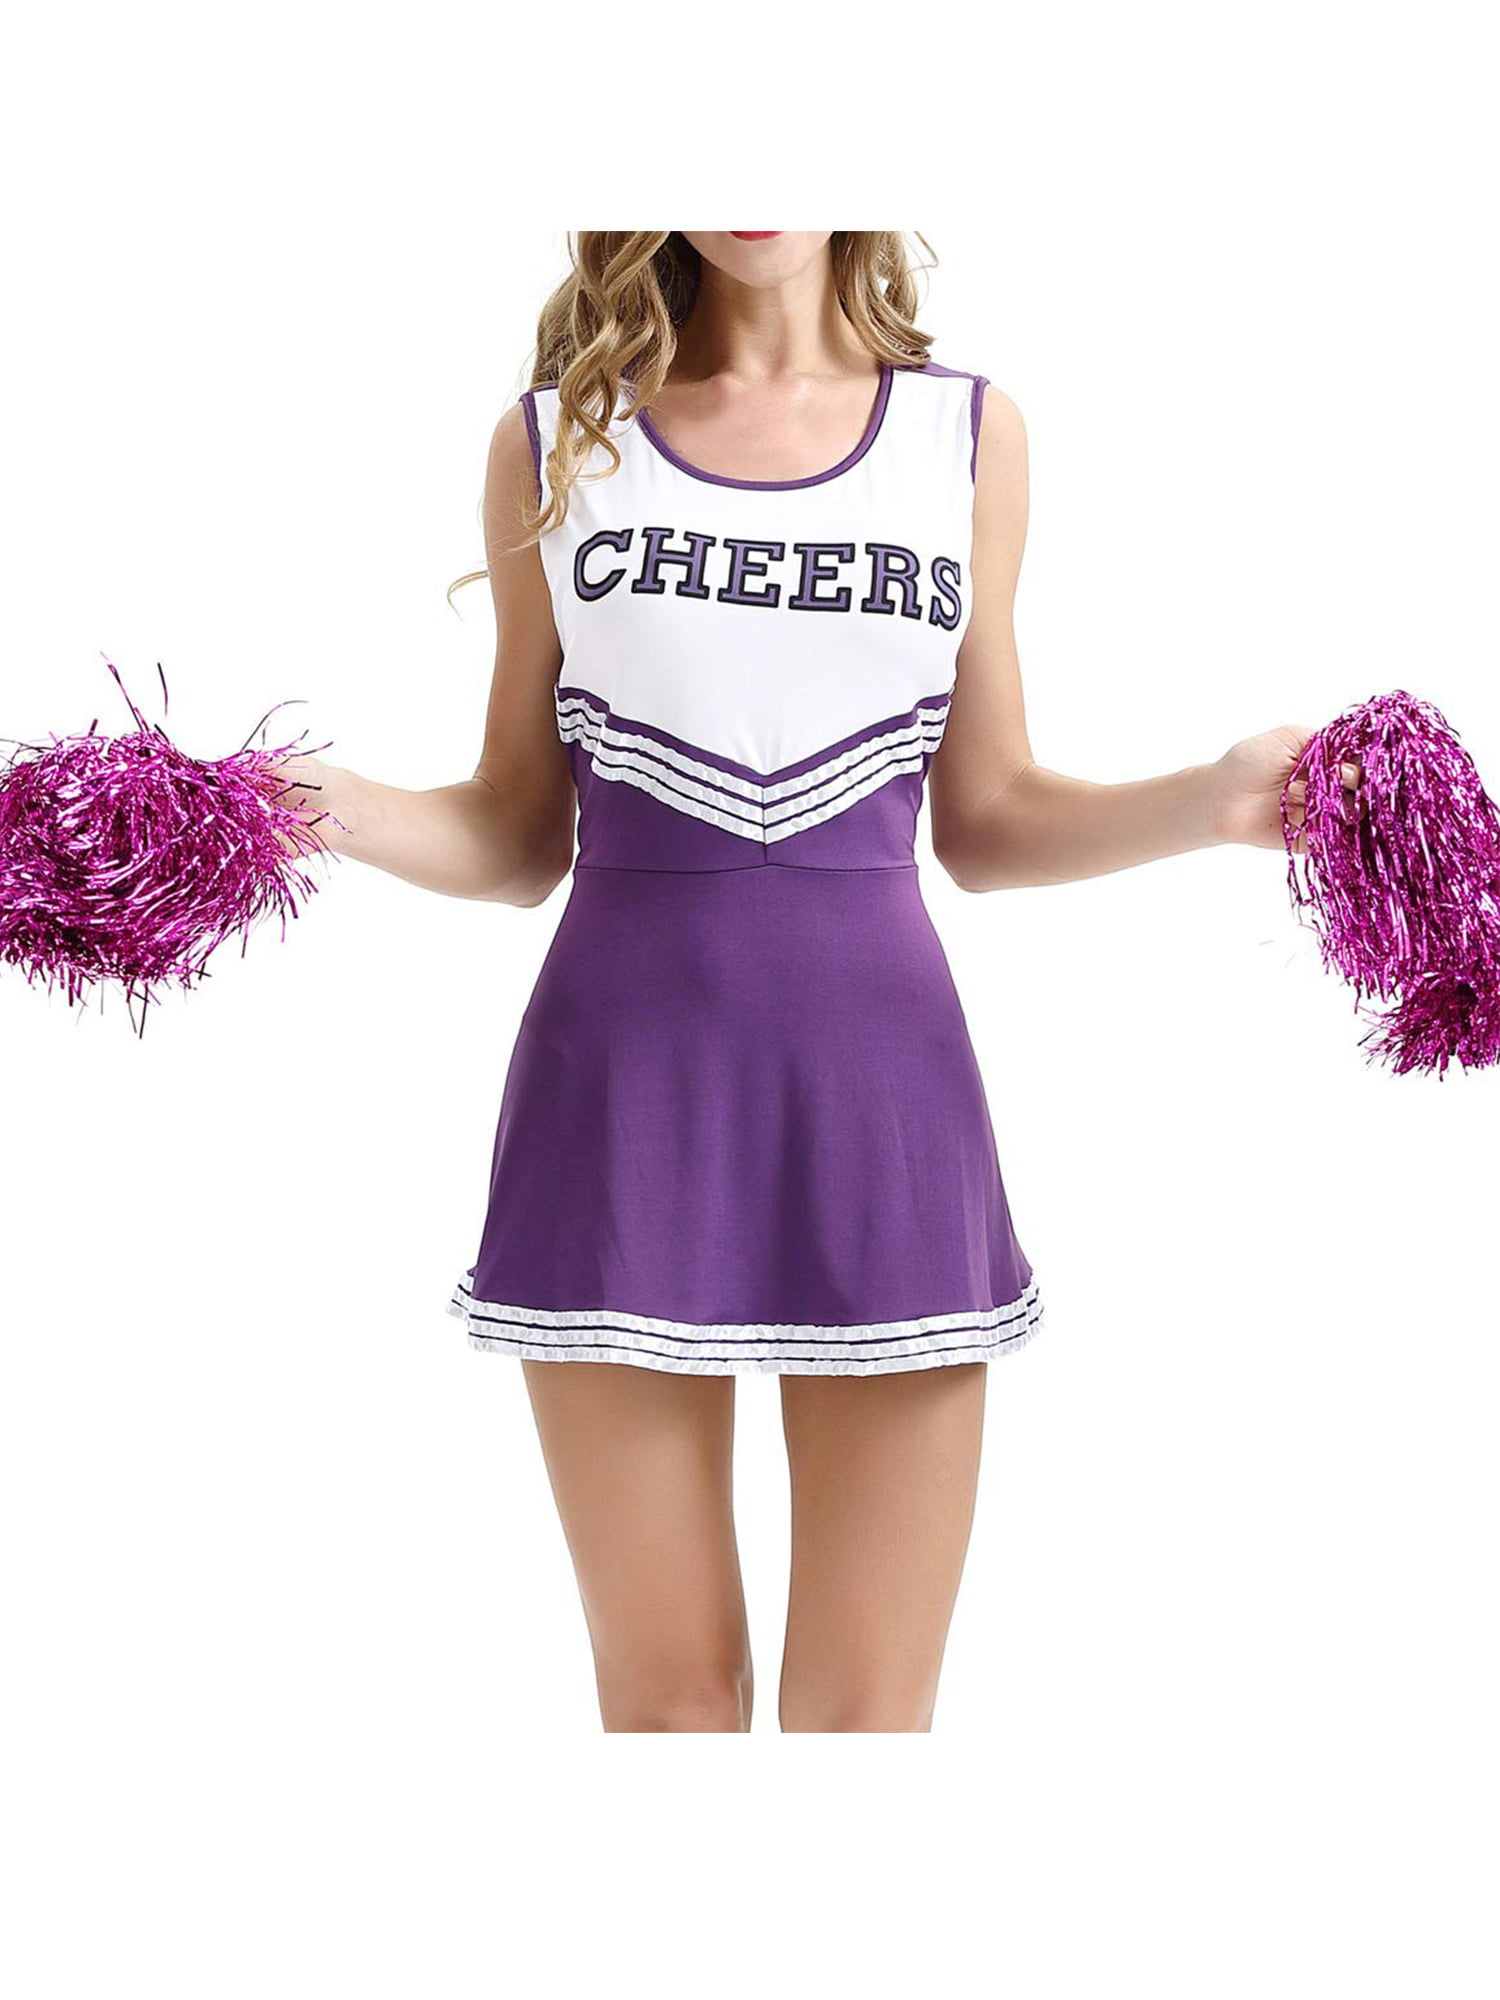 Women's Cheerleader Fancy Dress Costume With Pom Poms High School Musical Outfit 